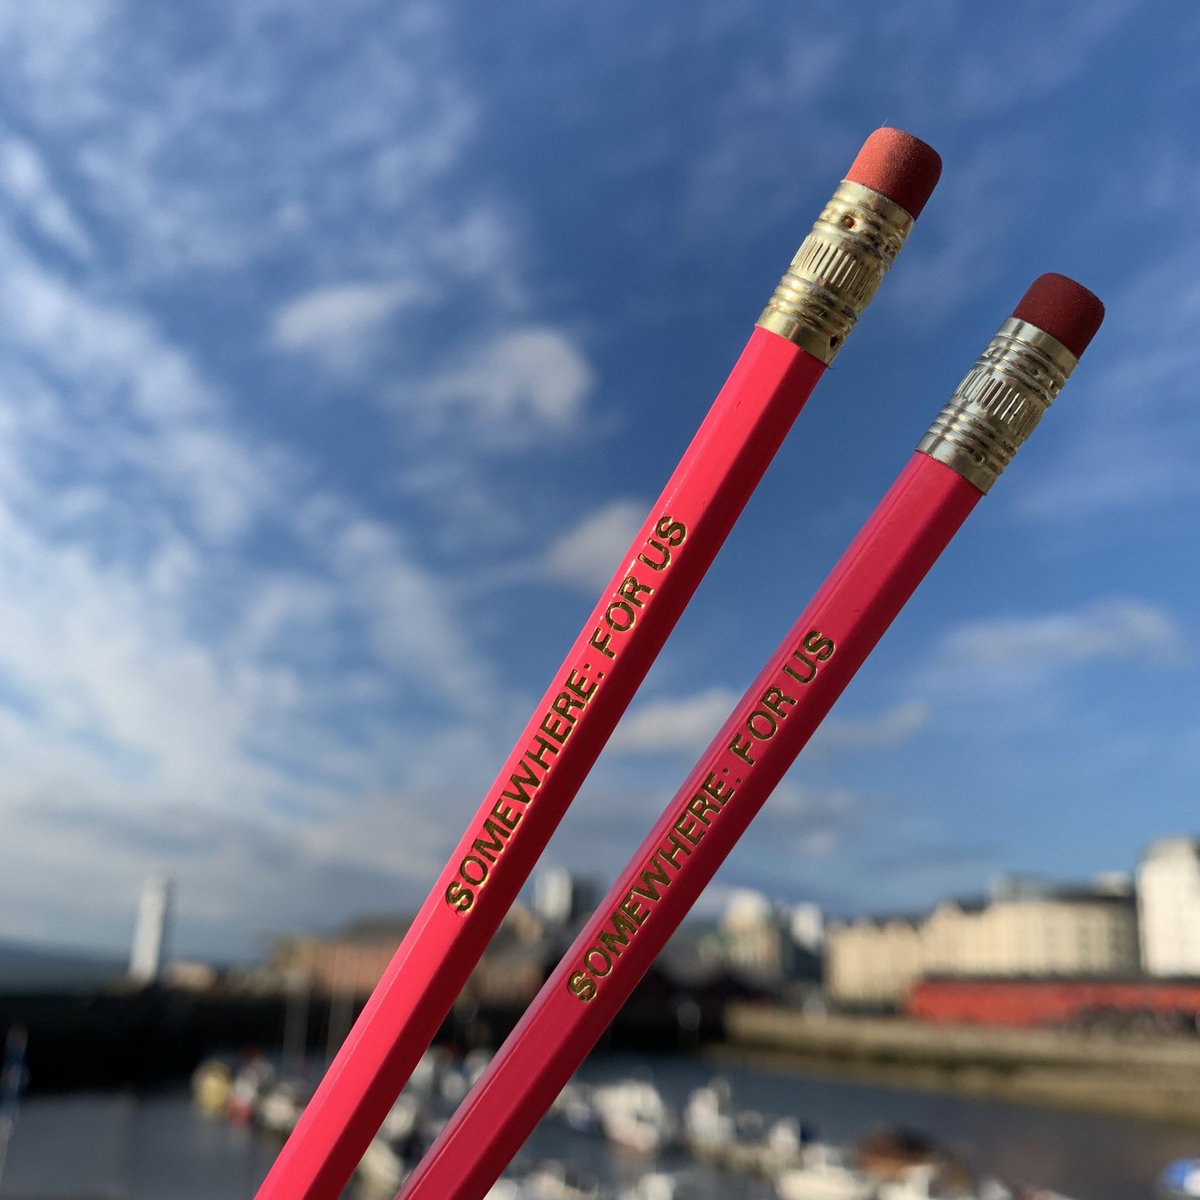 Oh my, check out our fabulous flamingo pink #SomewhereForUs 🏳️‍🌈 pencils with beautiful gold lettering. We love them! They’re part of our Rainbow Enterprise Network (REN) member welcome pack. Get in touch with us for more info! #VisibilityMatters